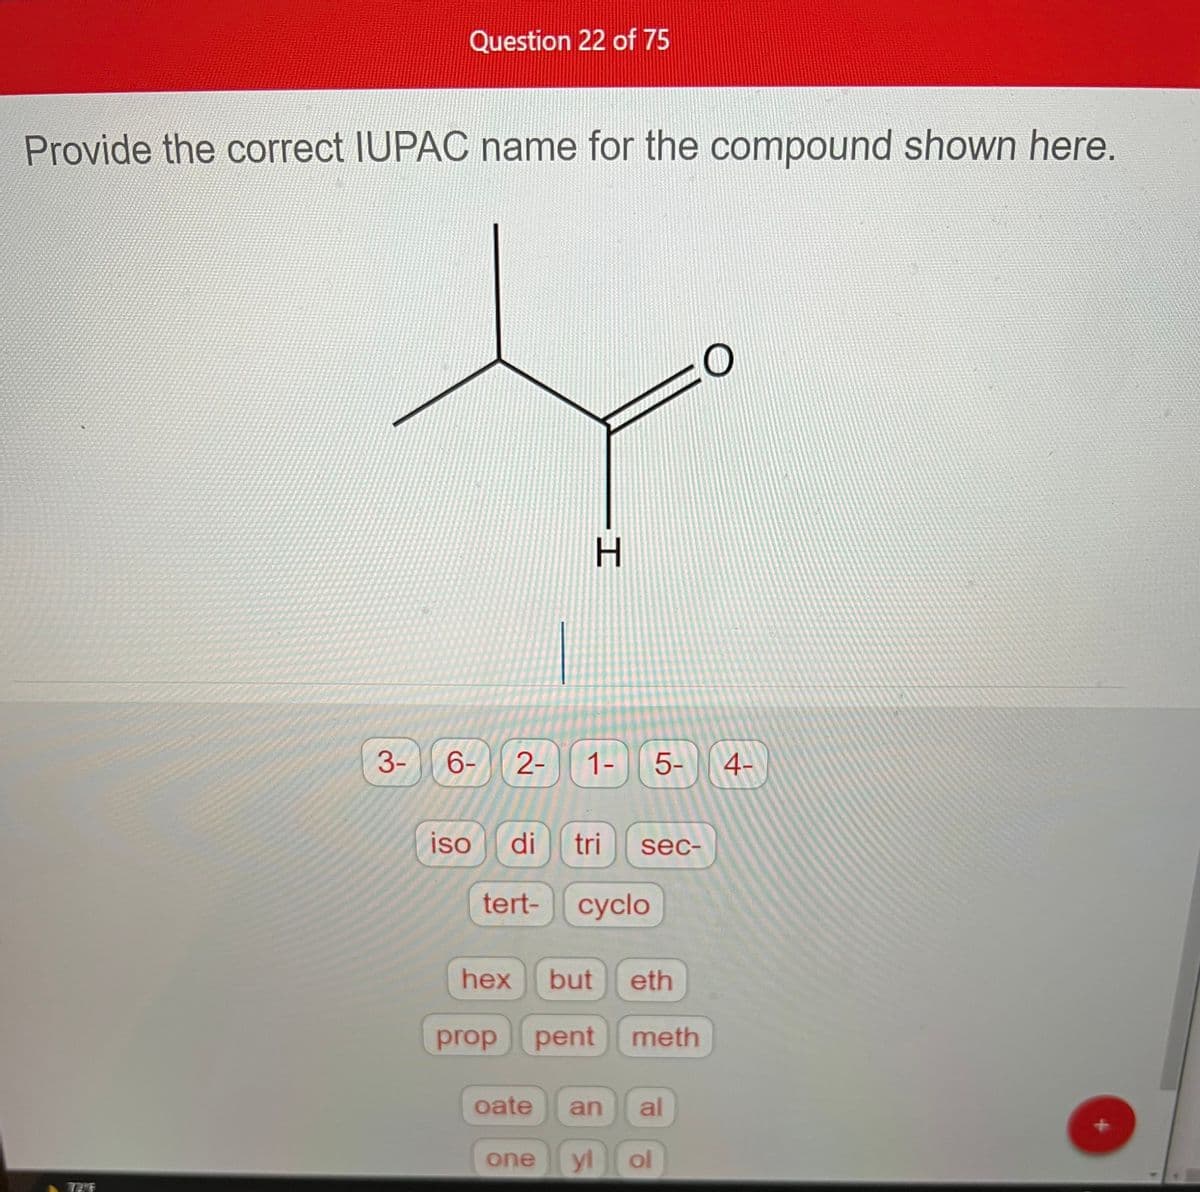 Provide the correct IUPAC name for the compound shown here.
TLF
Question 22 of 75
3-
6- 2-
H
1-
O
5- 4-
iso di tri sec-
tert- cyclo
oate an
hex but eth
prop pent meth
al
one yl ol
+